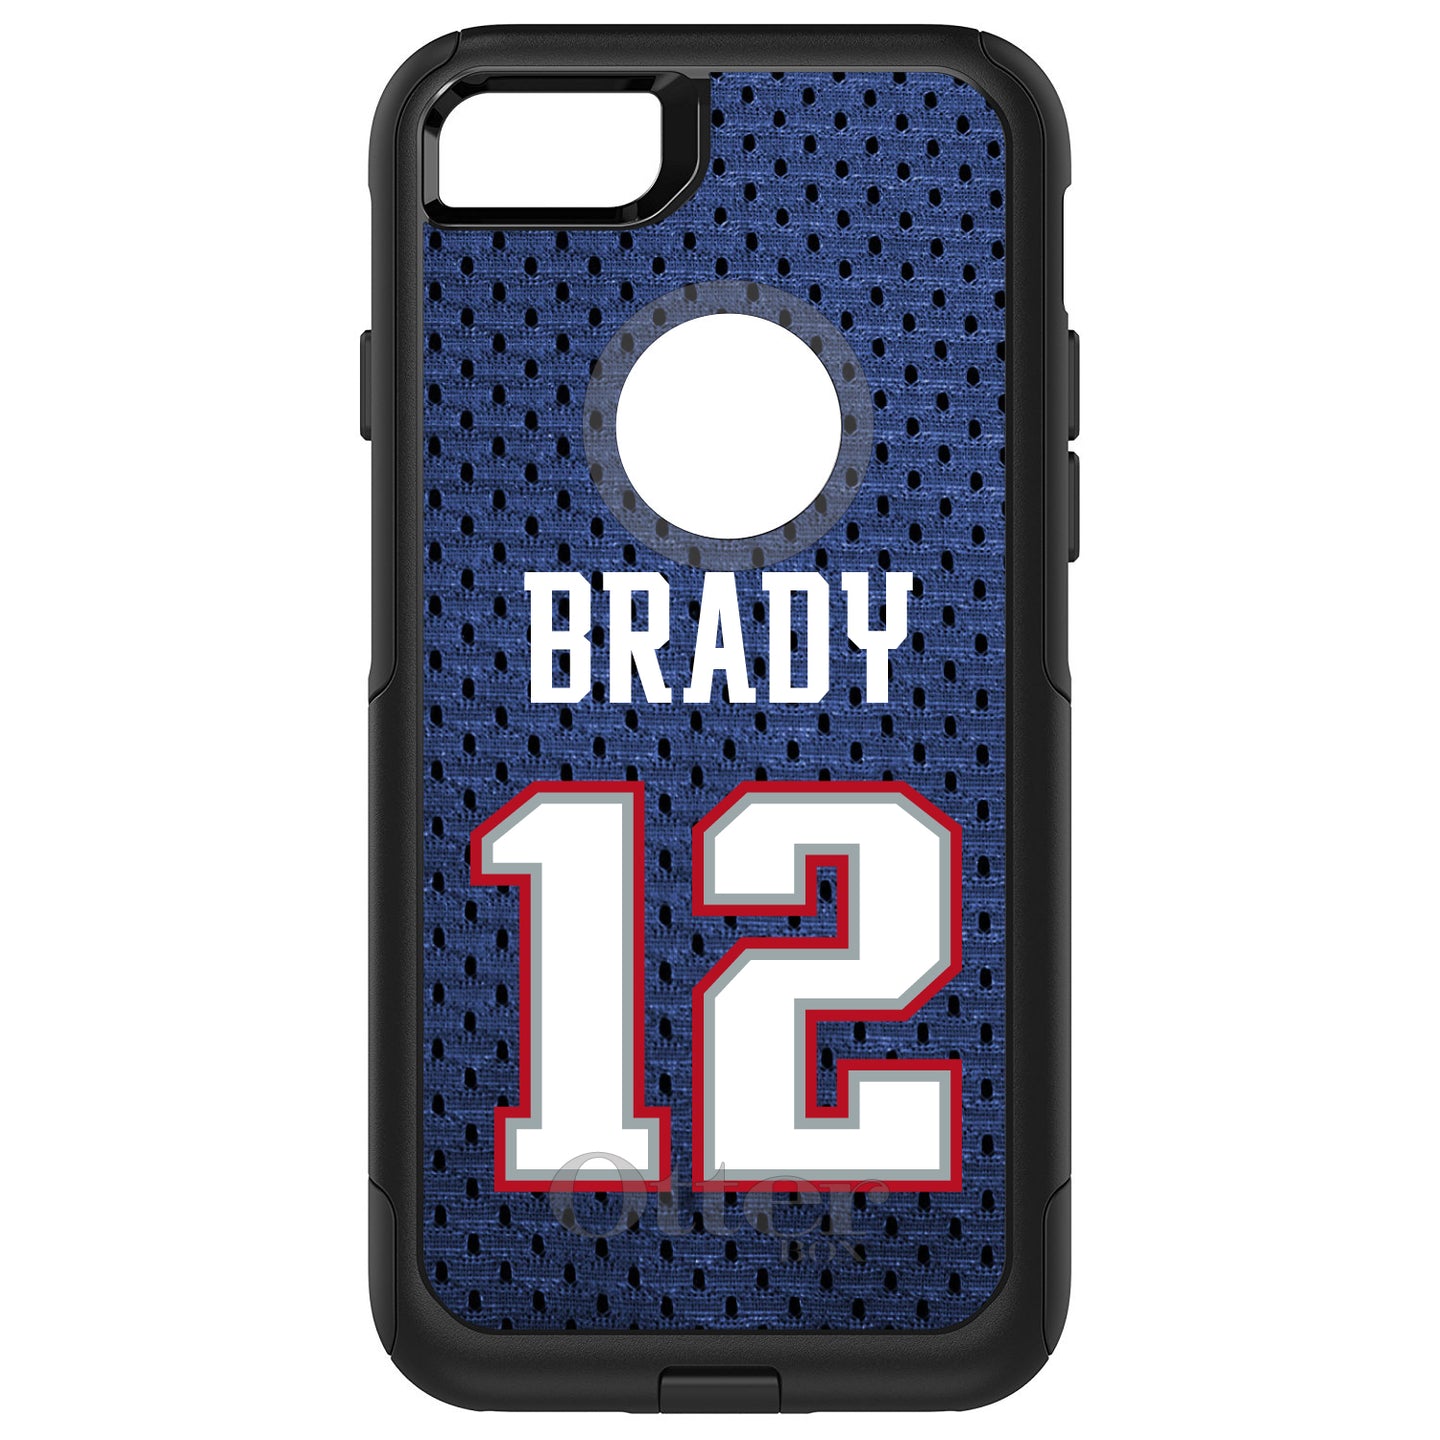 DistinctInk™ OtterBox Commuter Series Case for Apple iPhone or Samsung Galaxy - Brady 12 Jersey